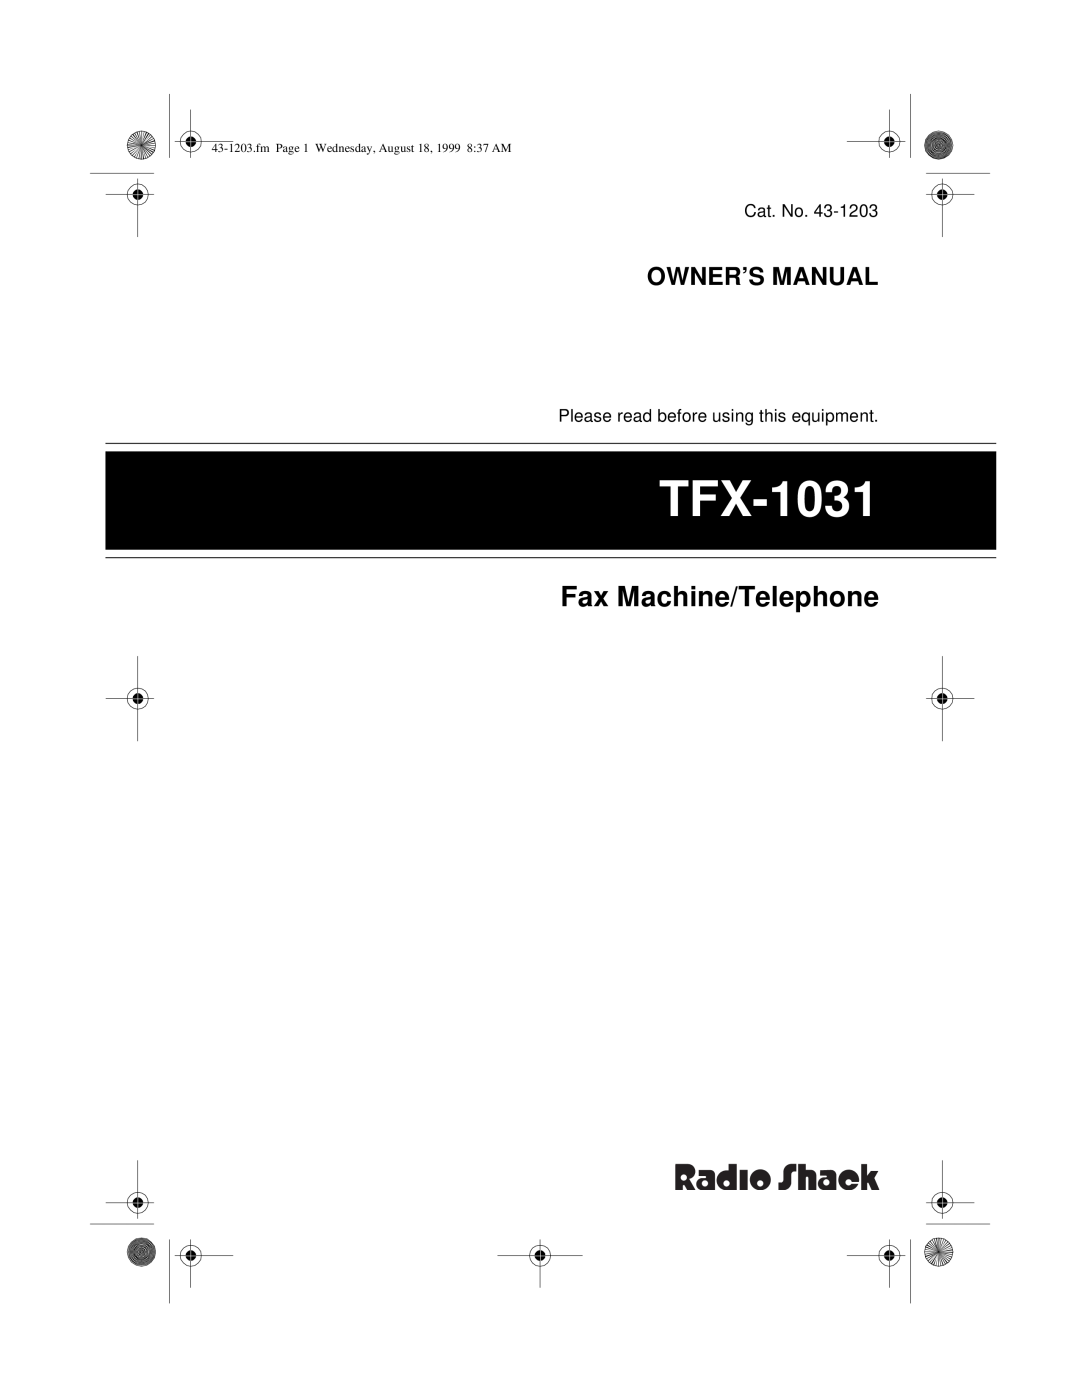 Radio Shack TFX-1031 owner manual Fax Machine/Telephone, Owner’S Manual, fm Page 1 Wednesday, August 18, 1999 837 AM 